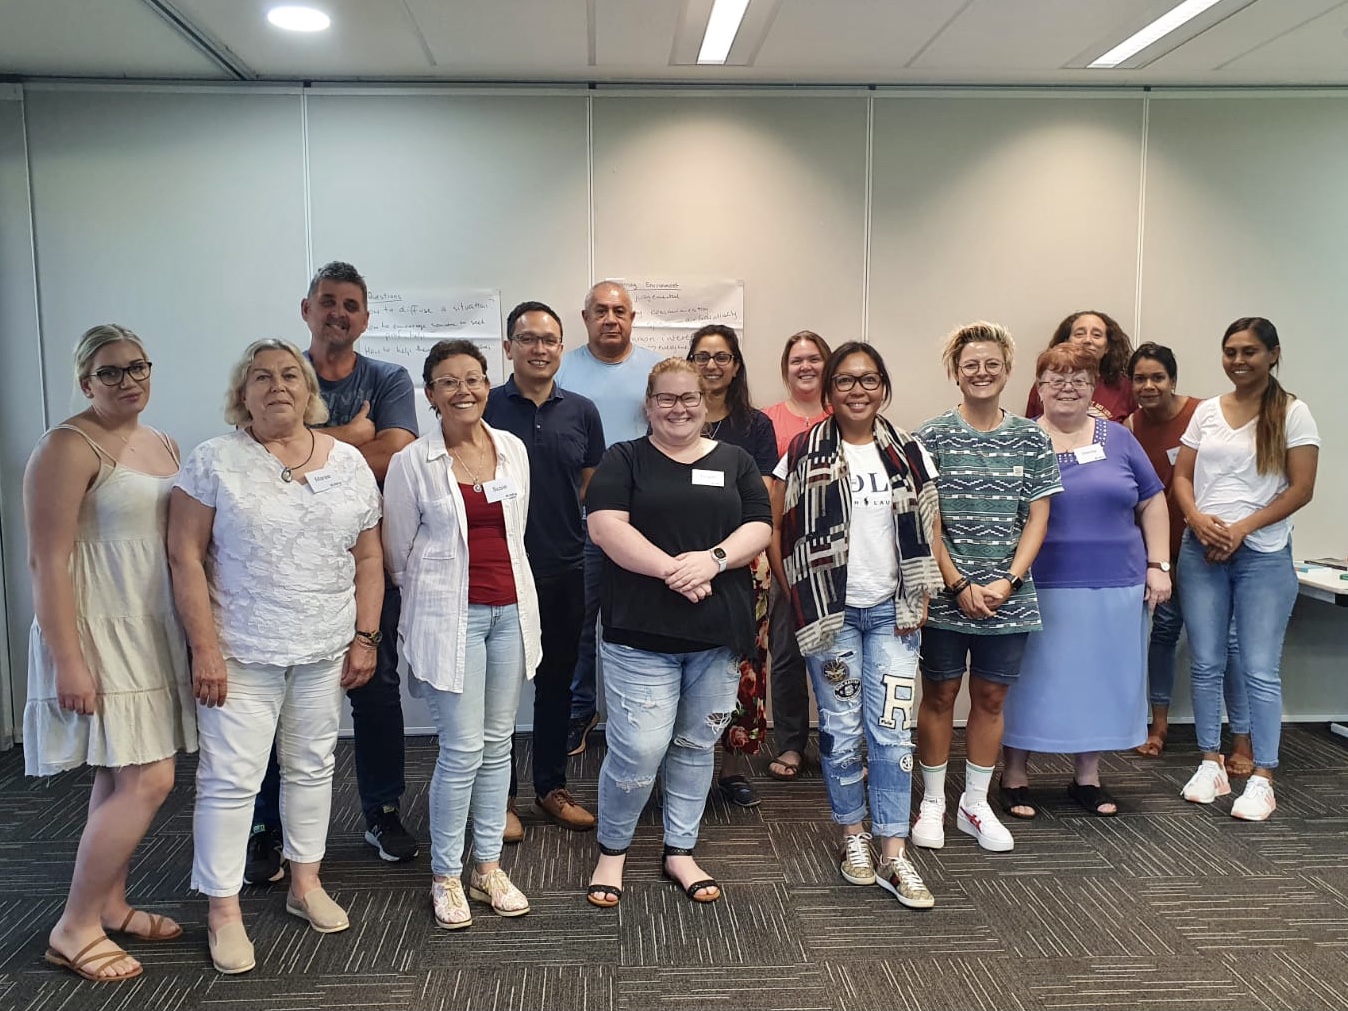 A group of 15 people (men and women), dressed in casual clothes, and smiling at the camera after completing the Mental Health First Aid course with Mental Strides